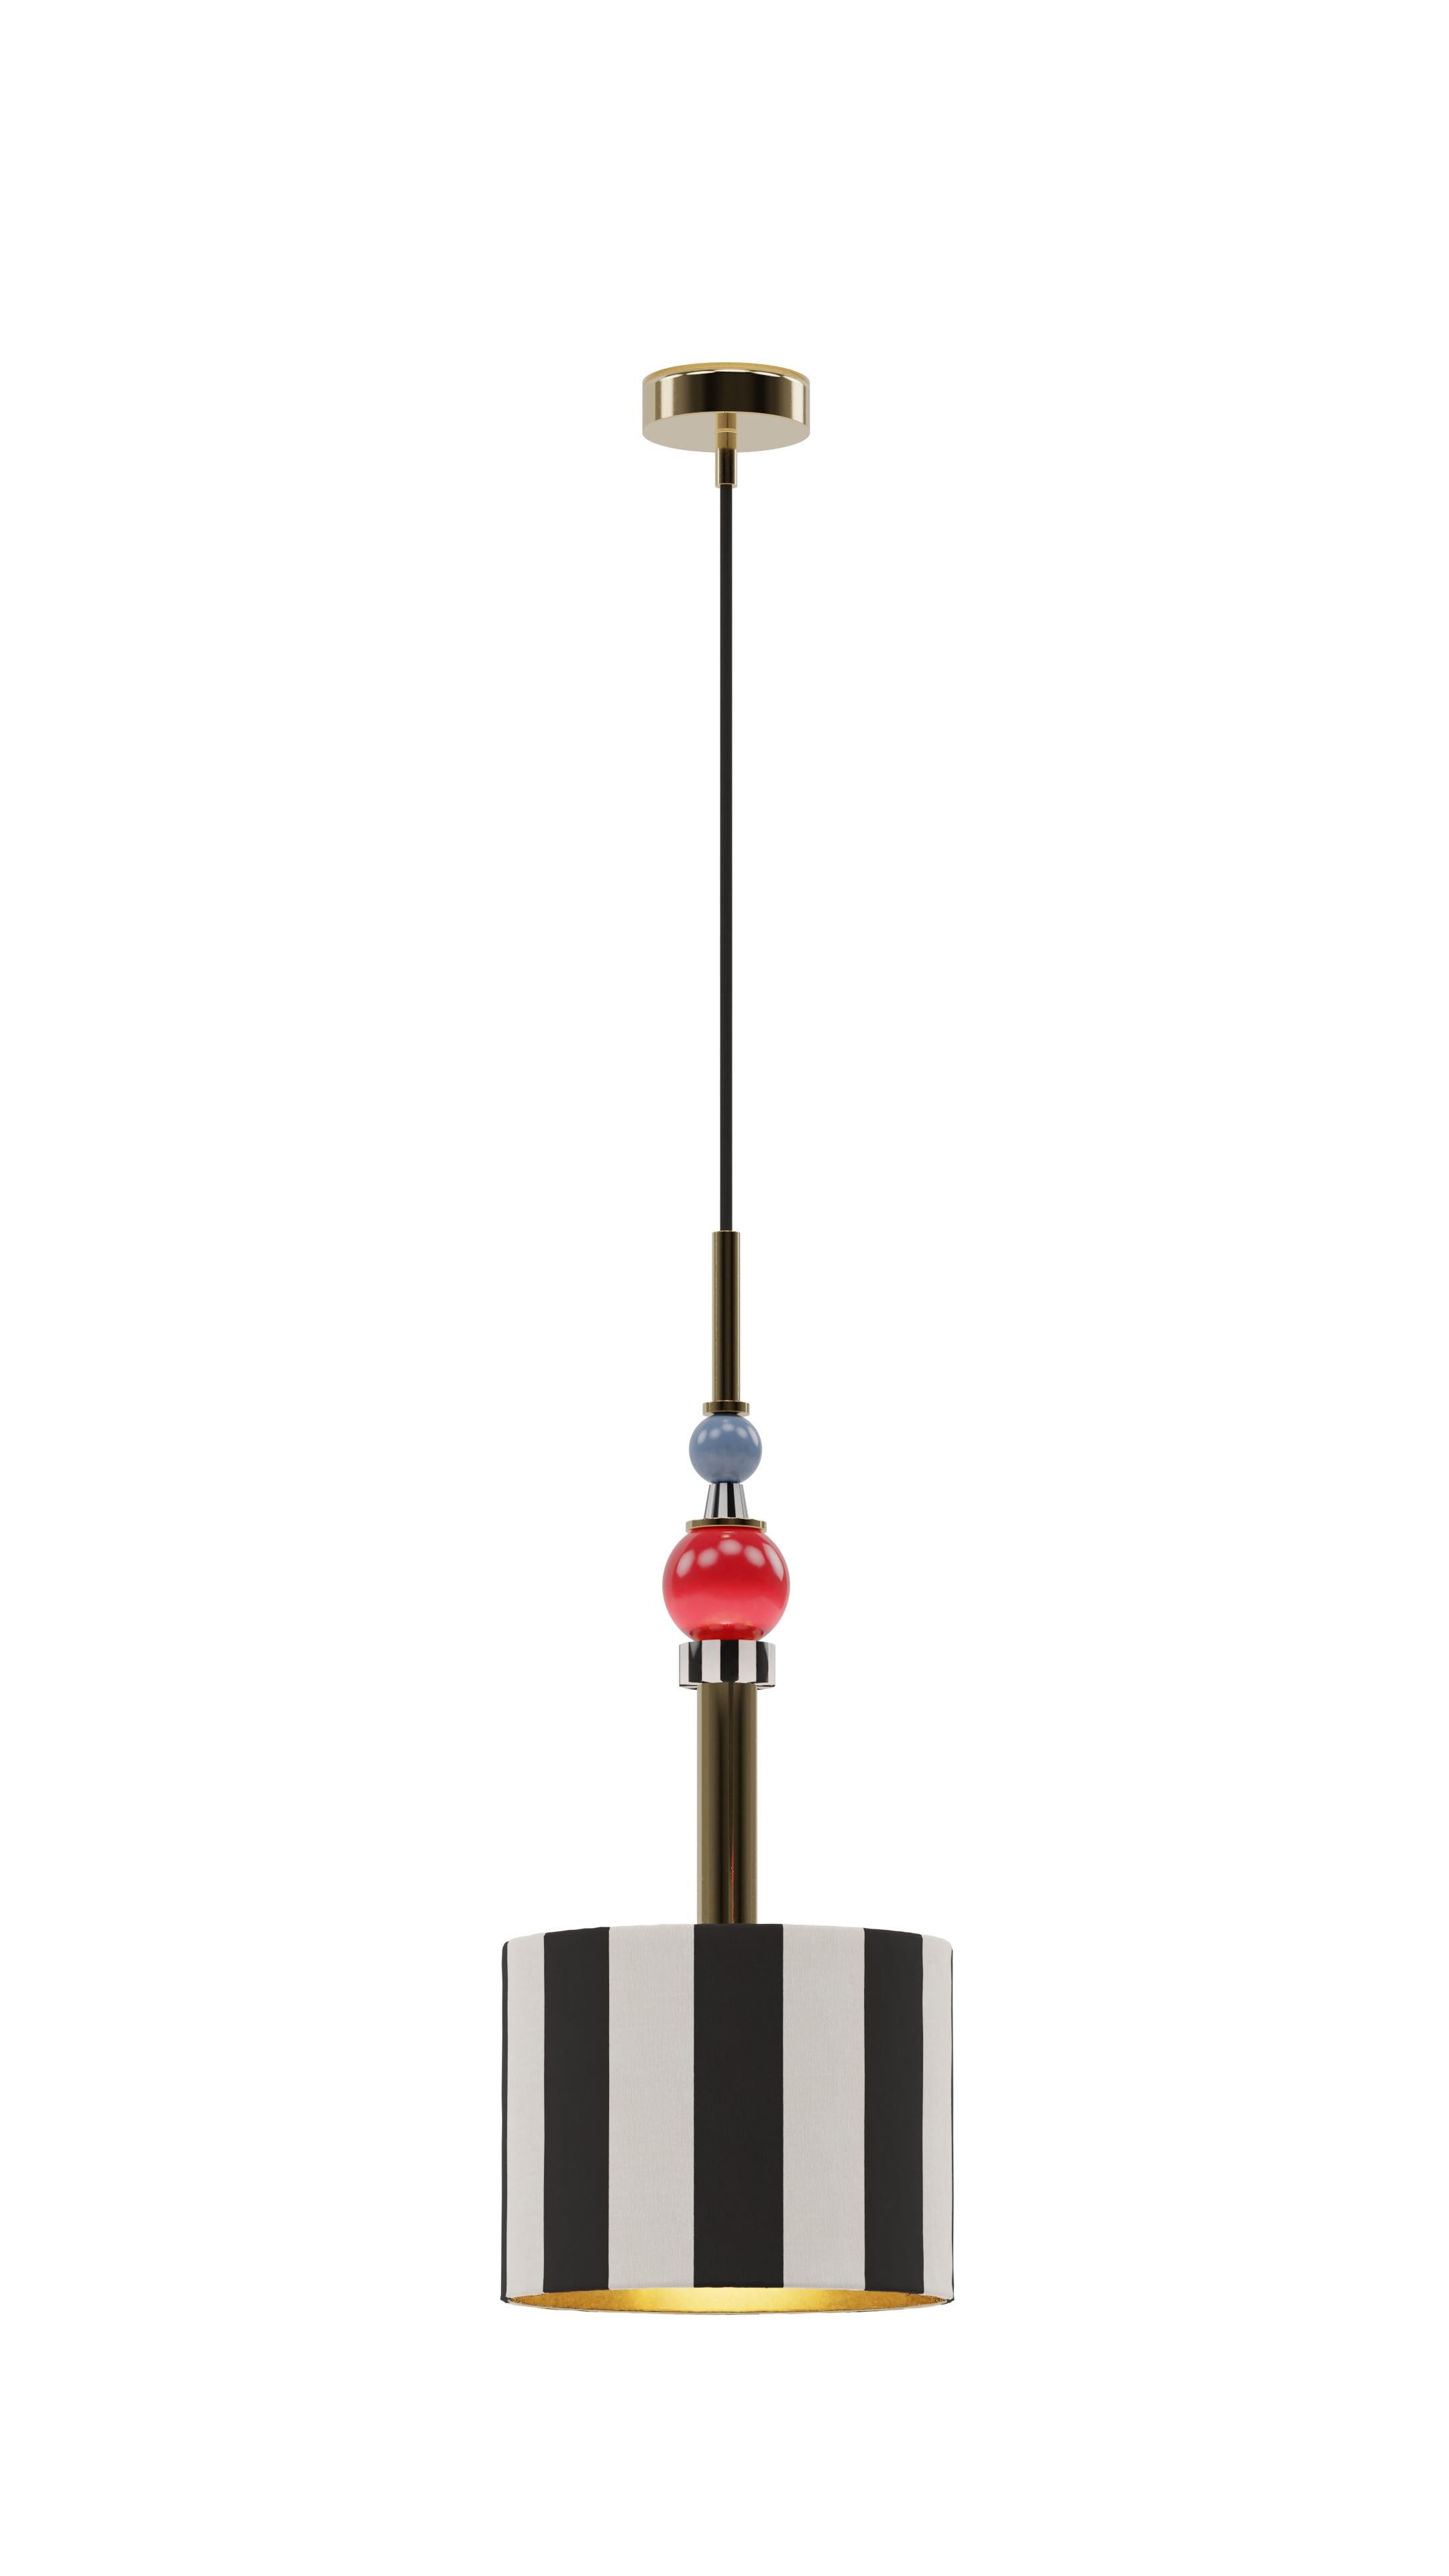 Alice ceiling lamp, Royal Stranger

Dimensions
Width 25cm, height 62cm (without cable) depth 25cm

Metals
Brass, copper or stainless steel in polished or brushed finish.

Inspired by the femininity and using bold and vibrant color schemes,